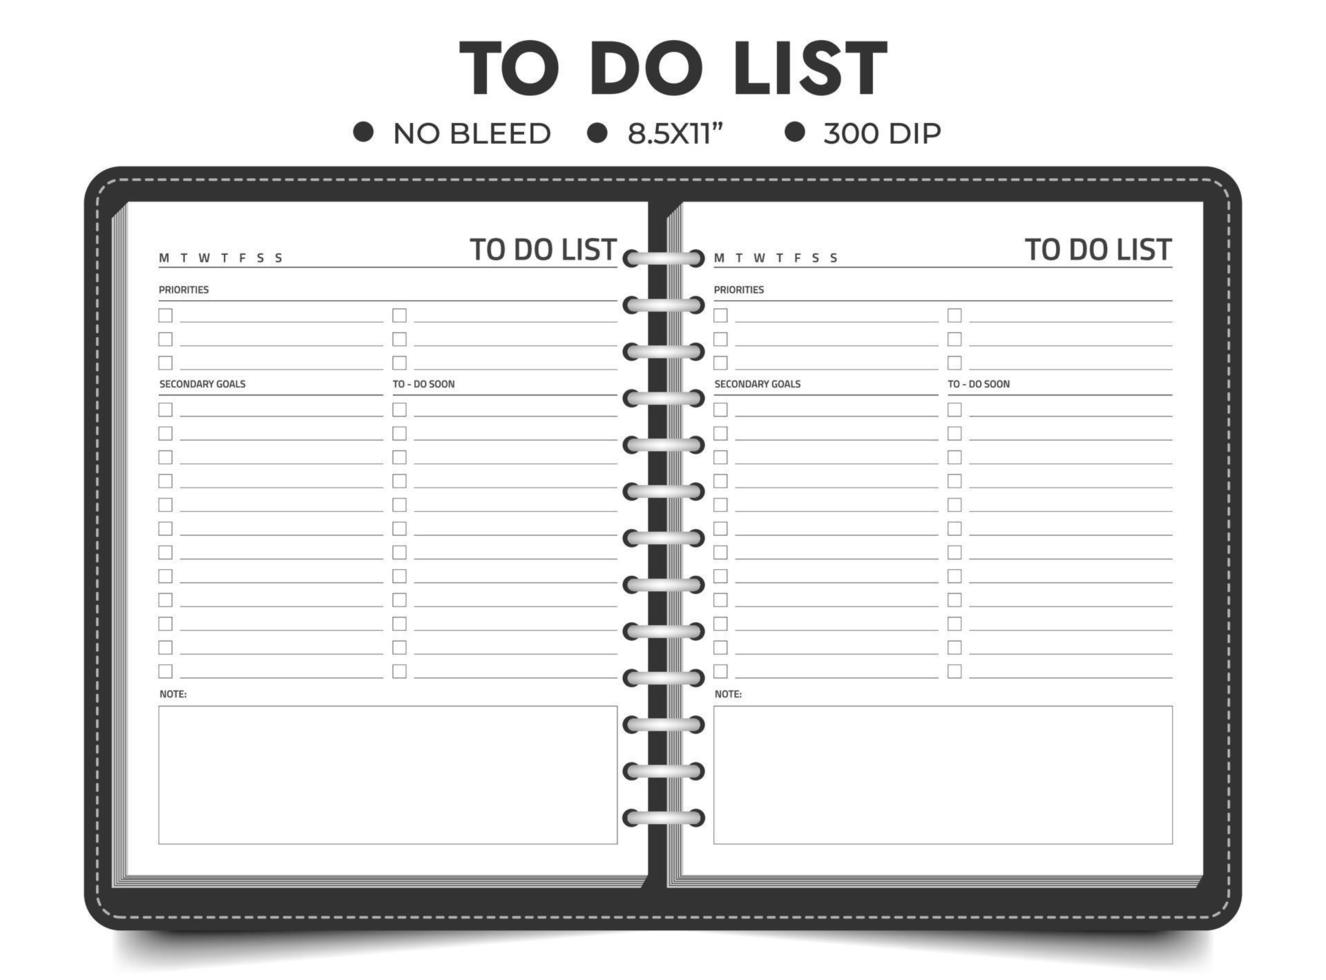 To-do list logbook or notebook vector